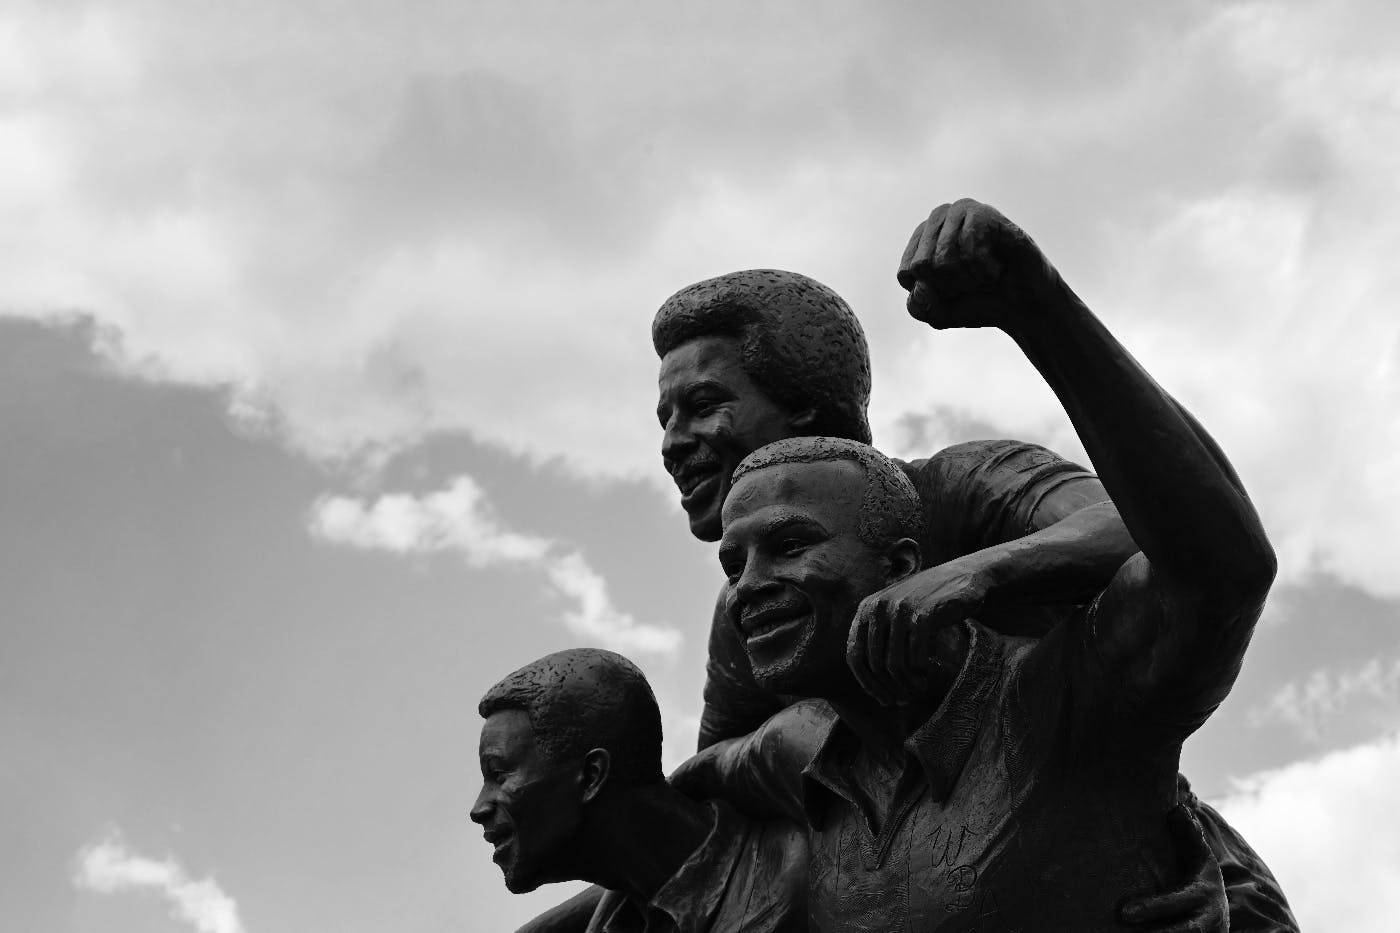 A statue of three black men showing resistance